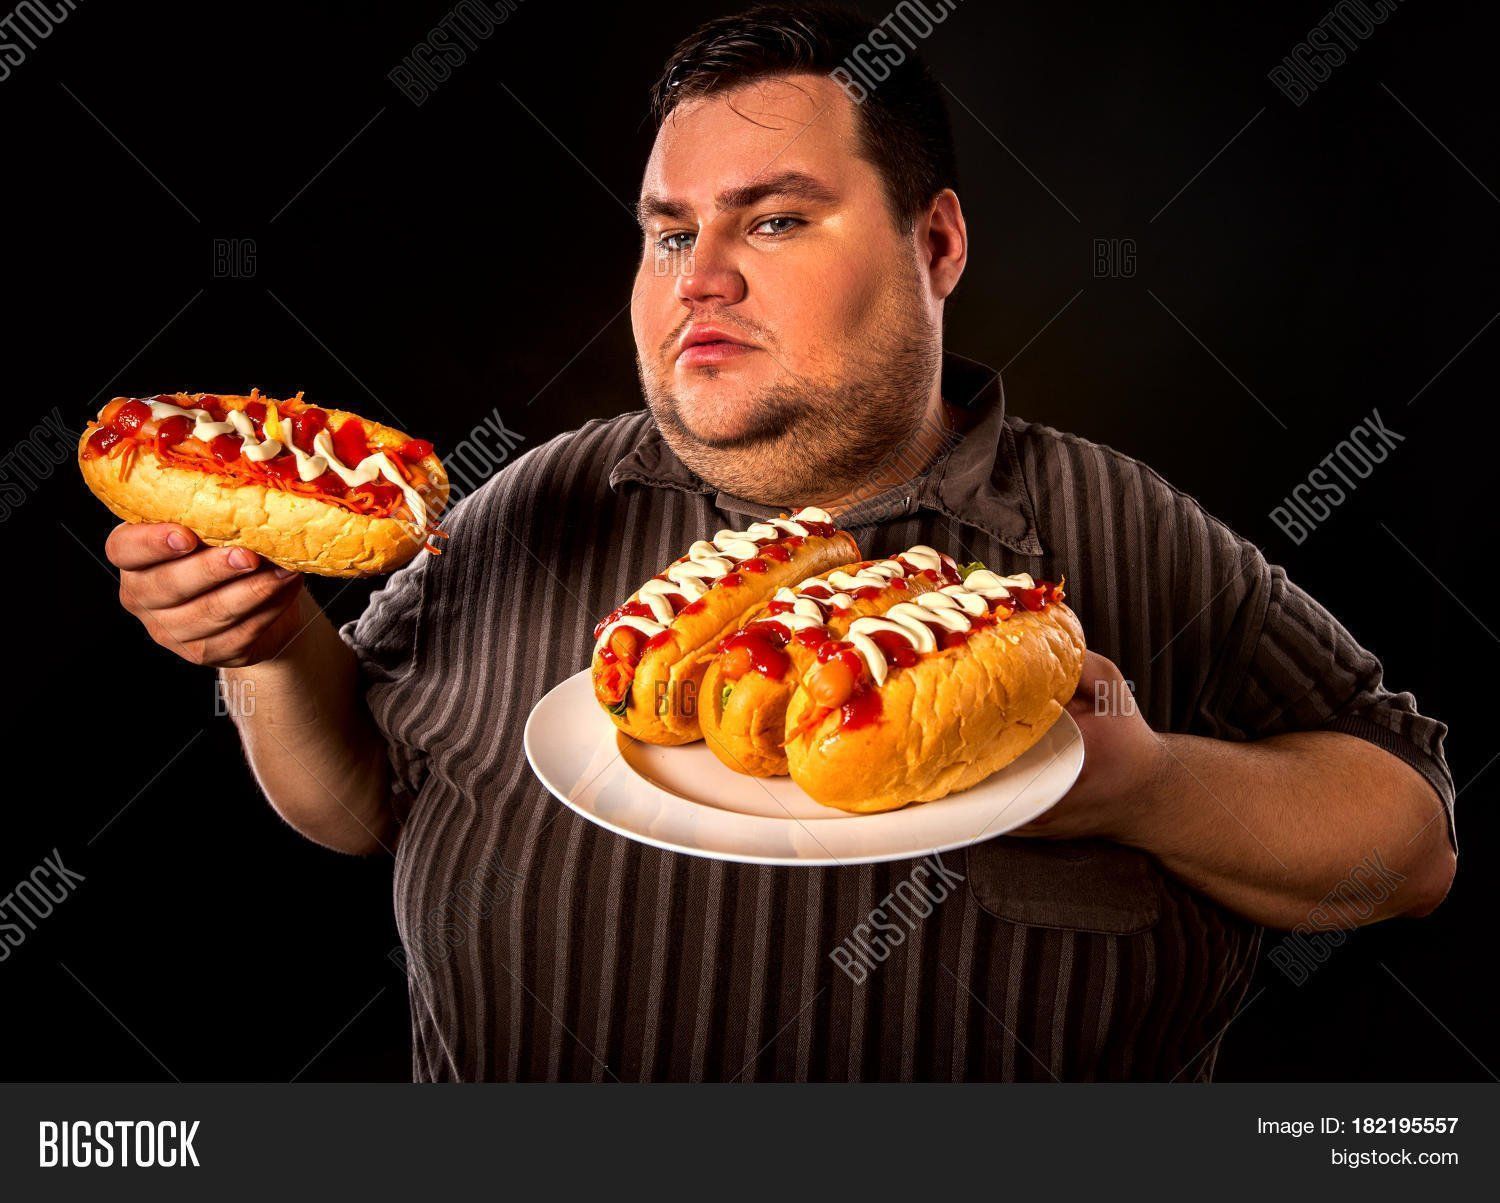 Fat person eating